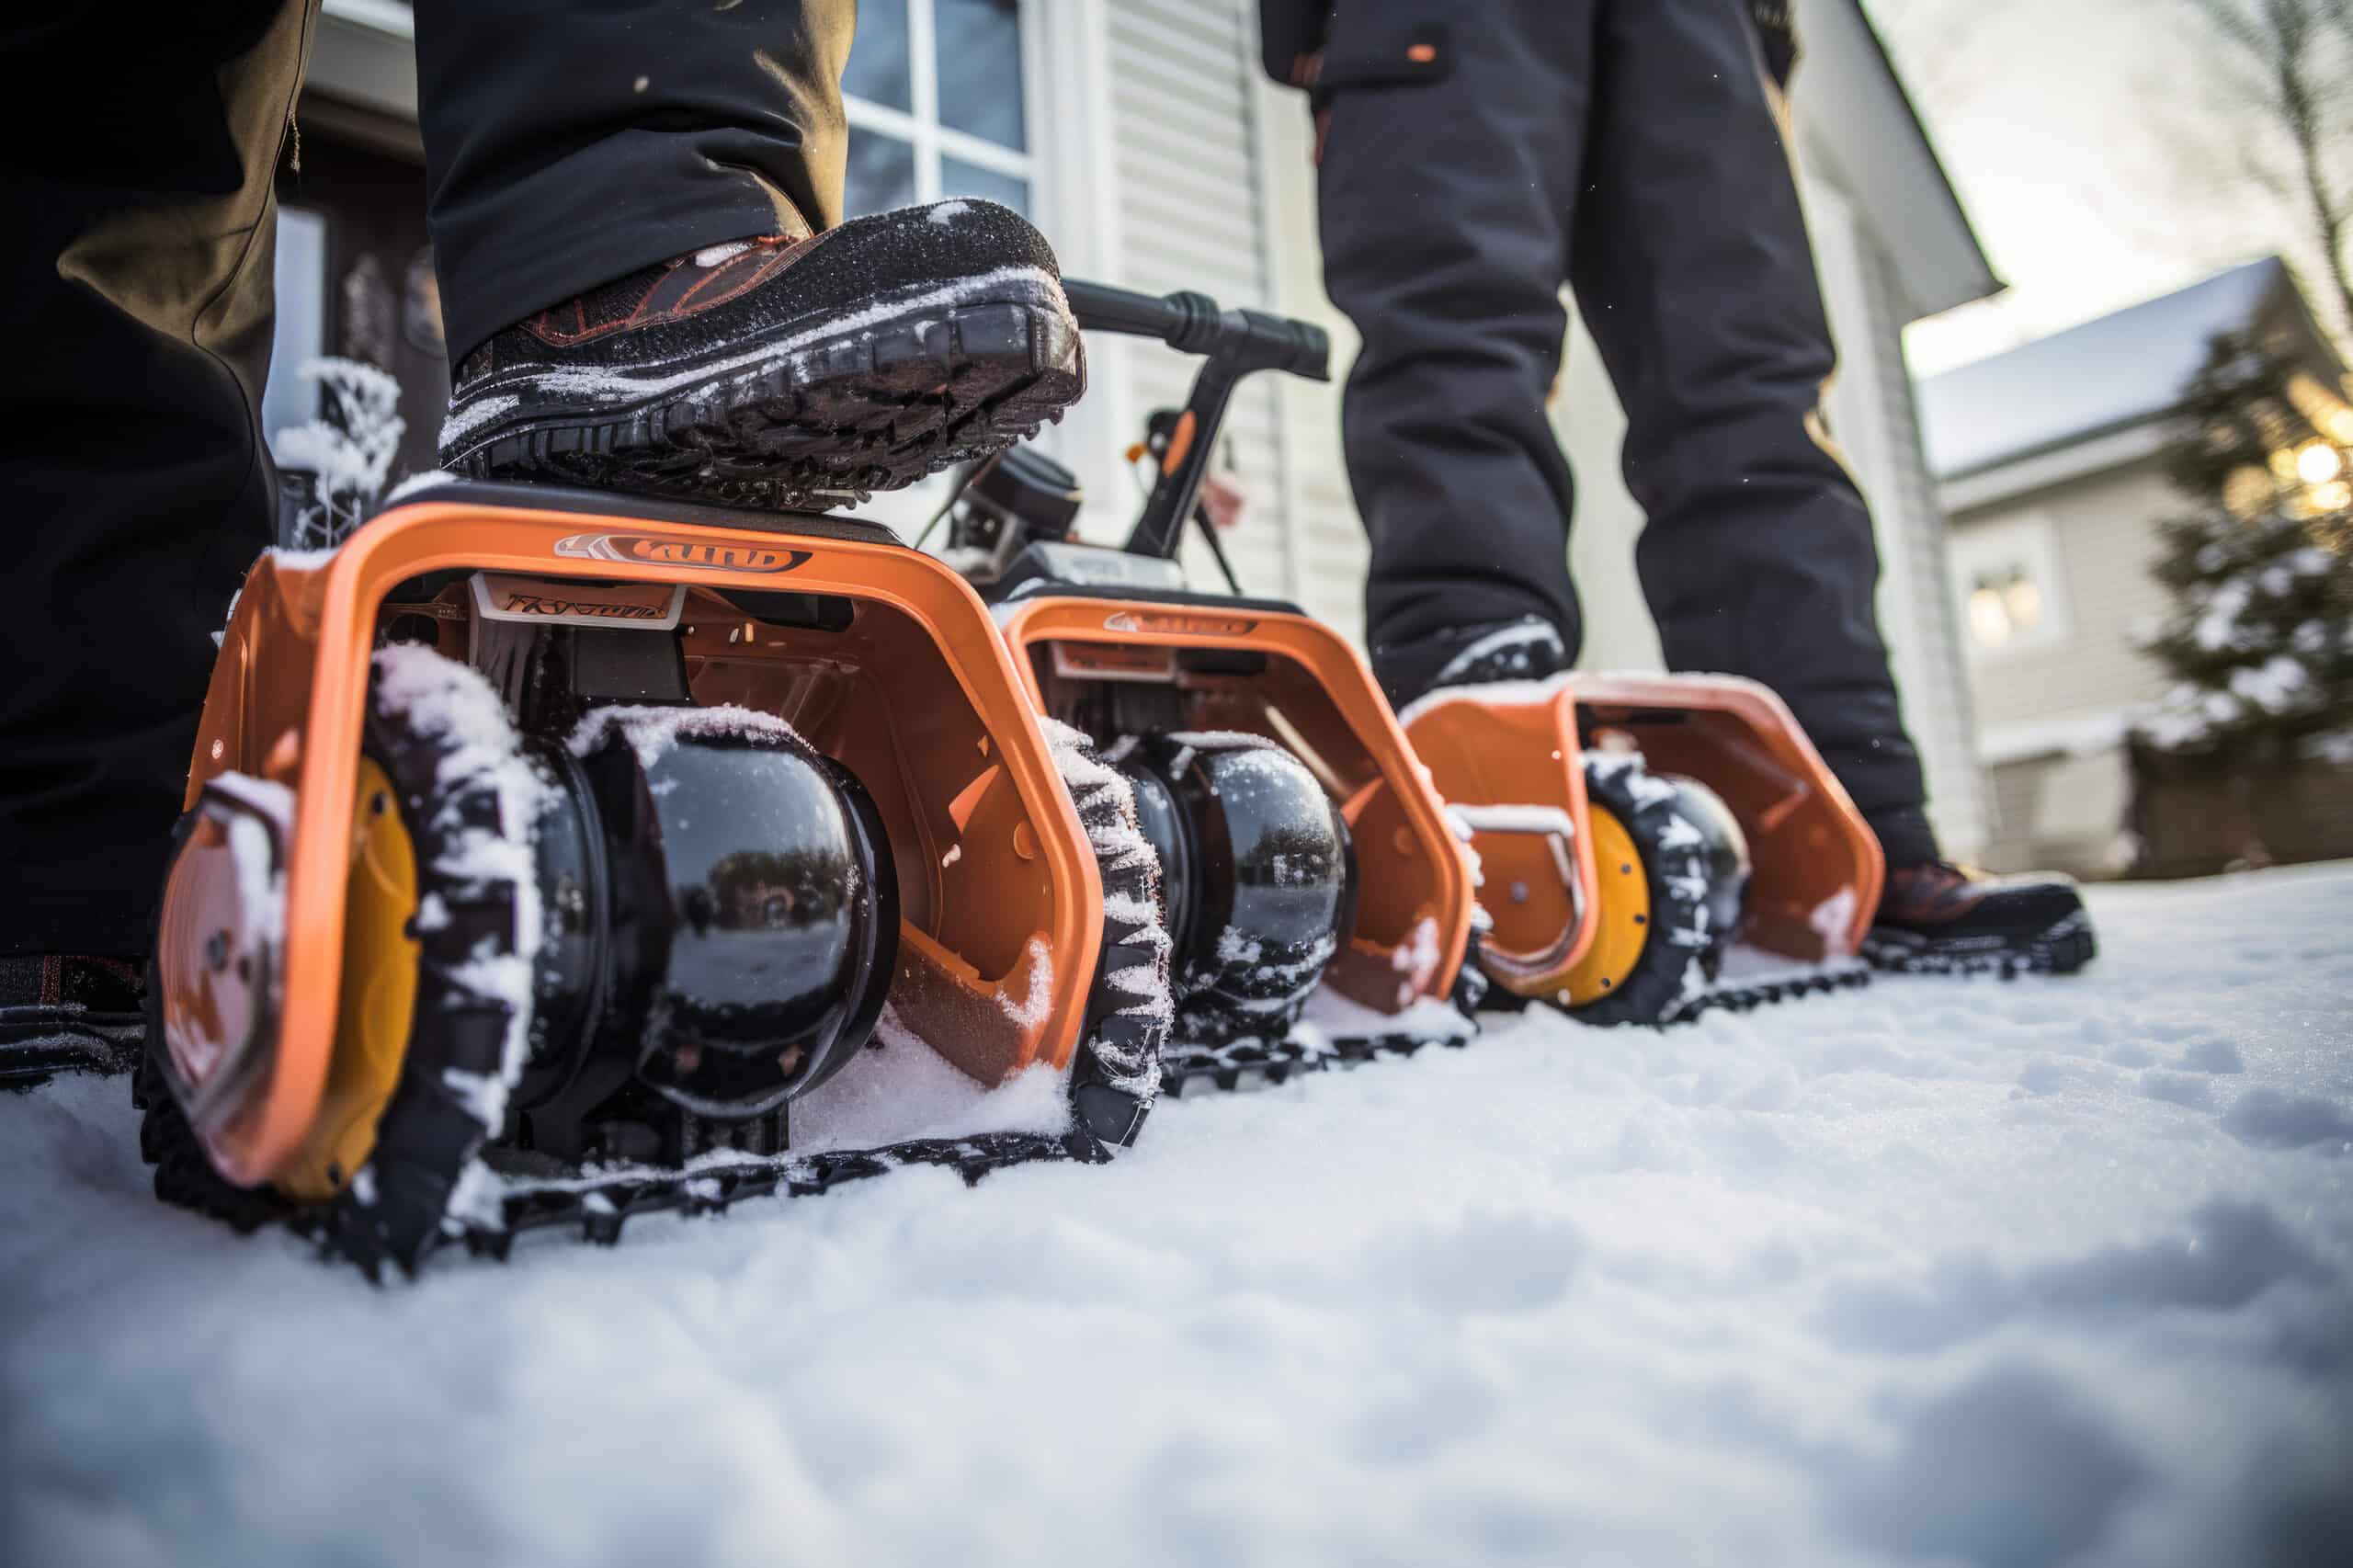 www.appr.com : What are two-stage snow blowers?